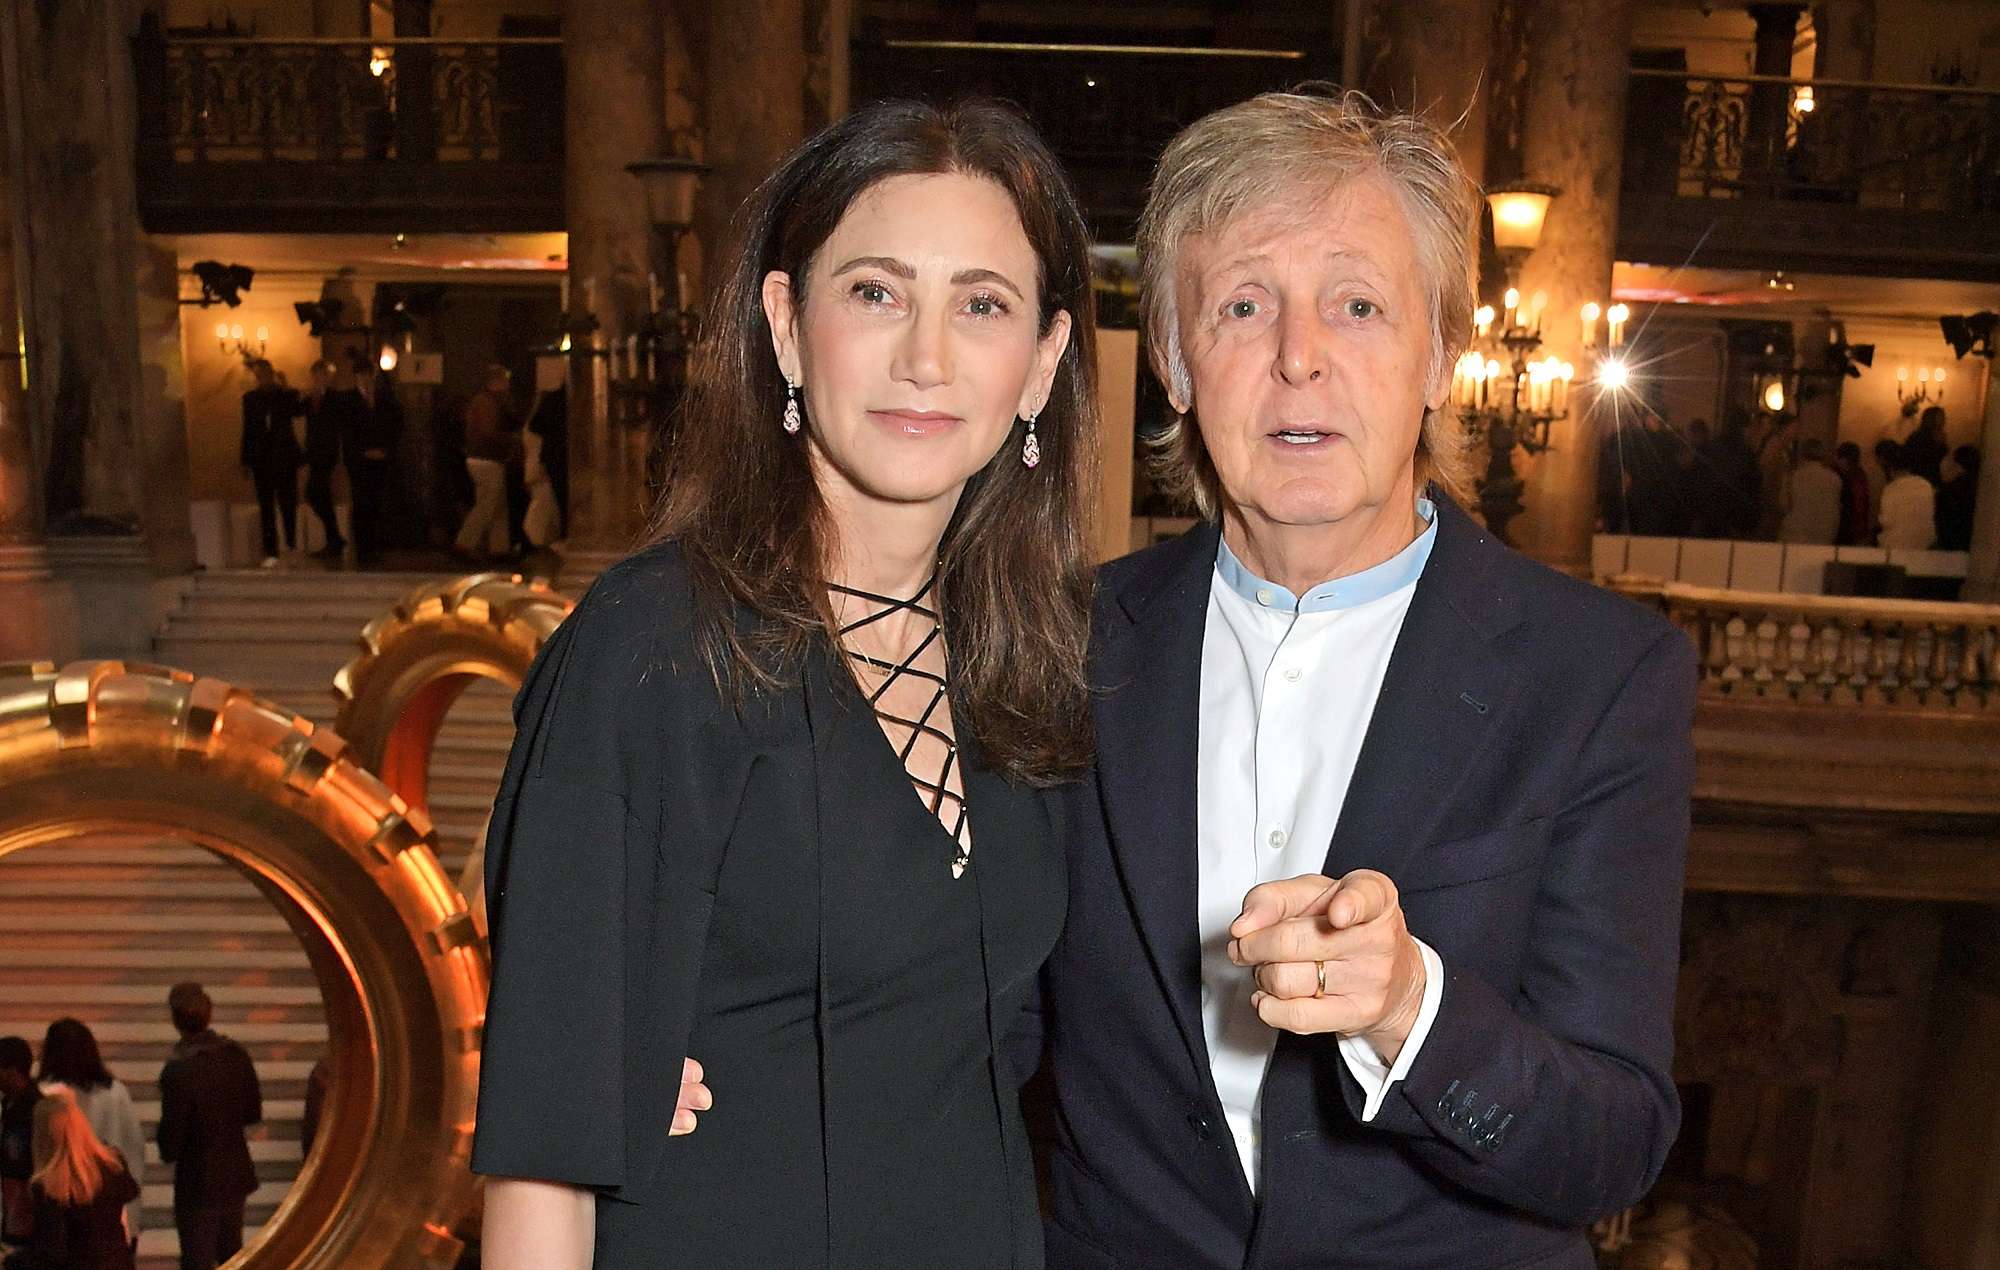 image for Paul McCartney secretly snuck into a cinema to watch ‘Yesterday’ and “loved it”